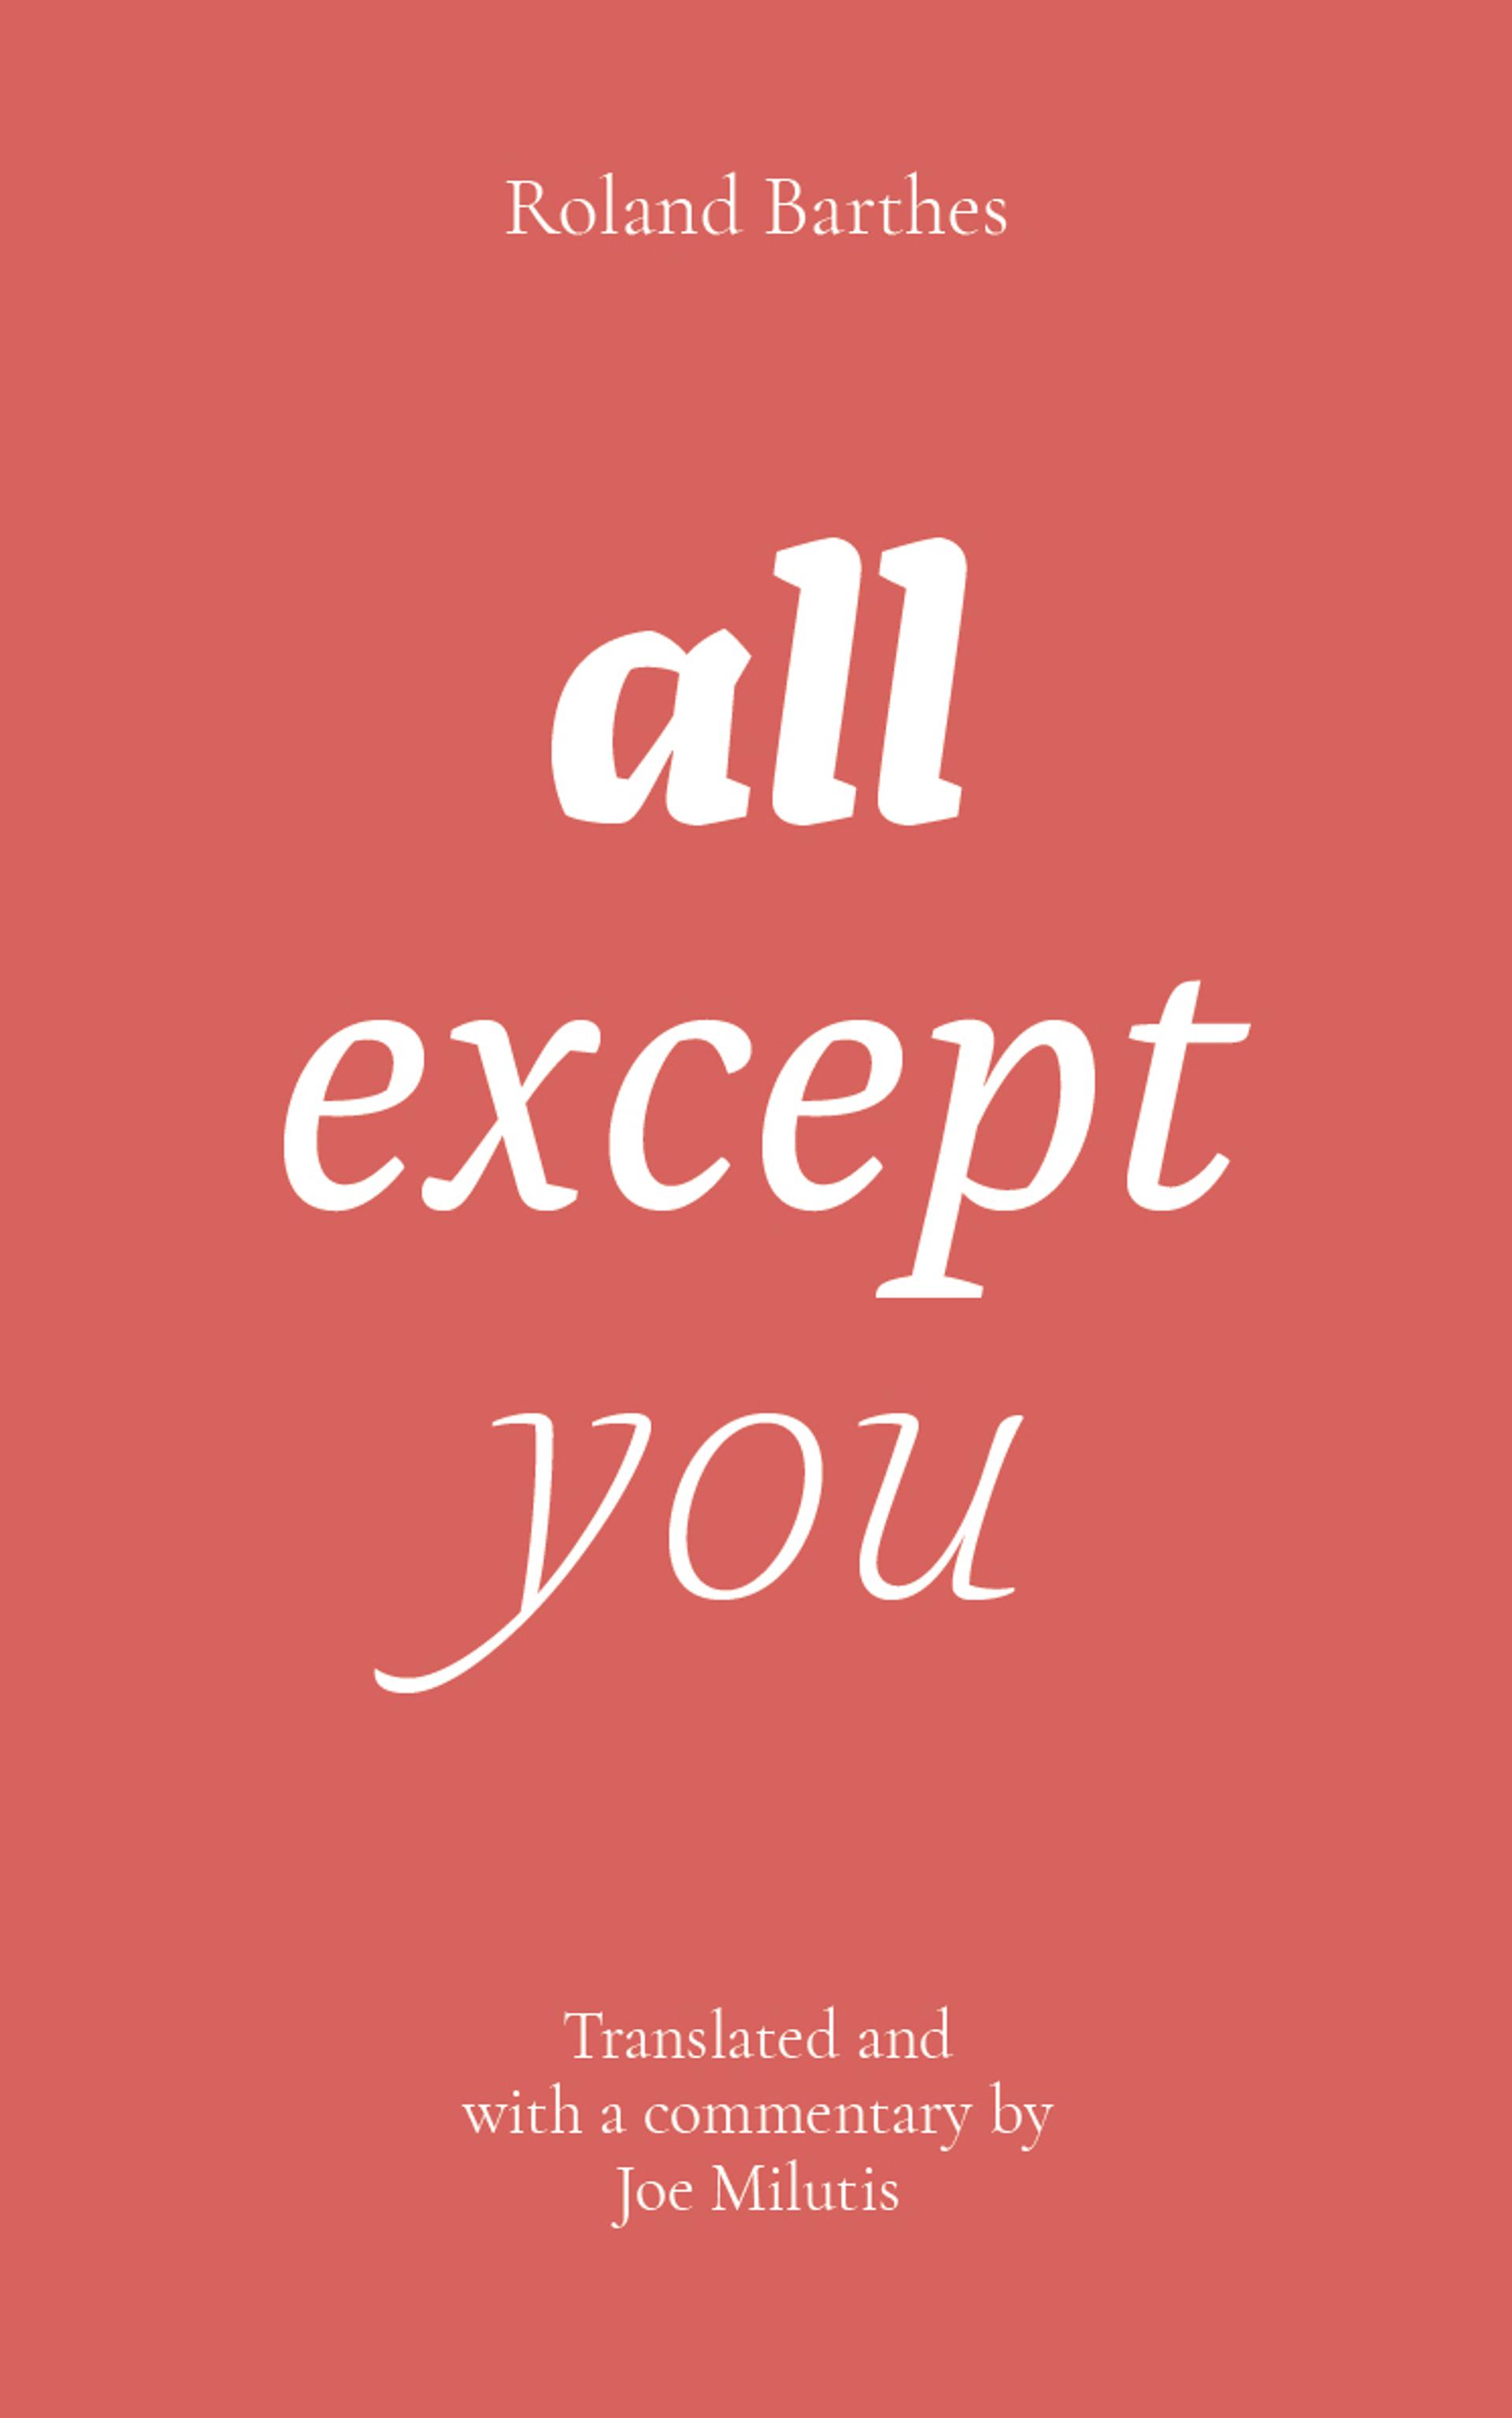 Cover of book titled all except you